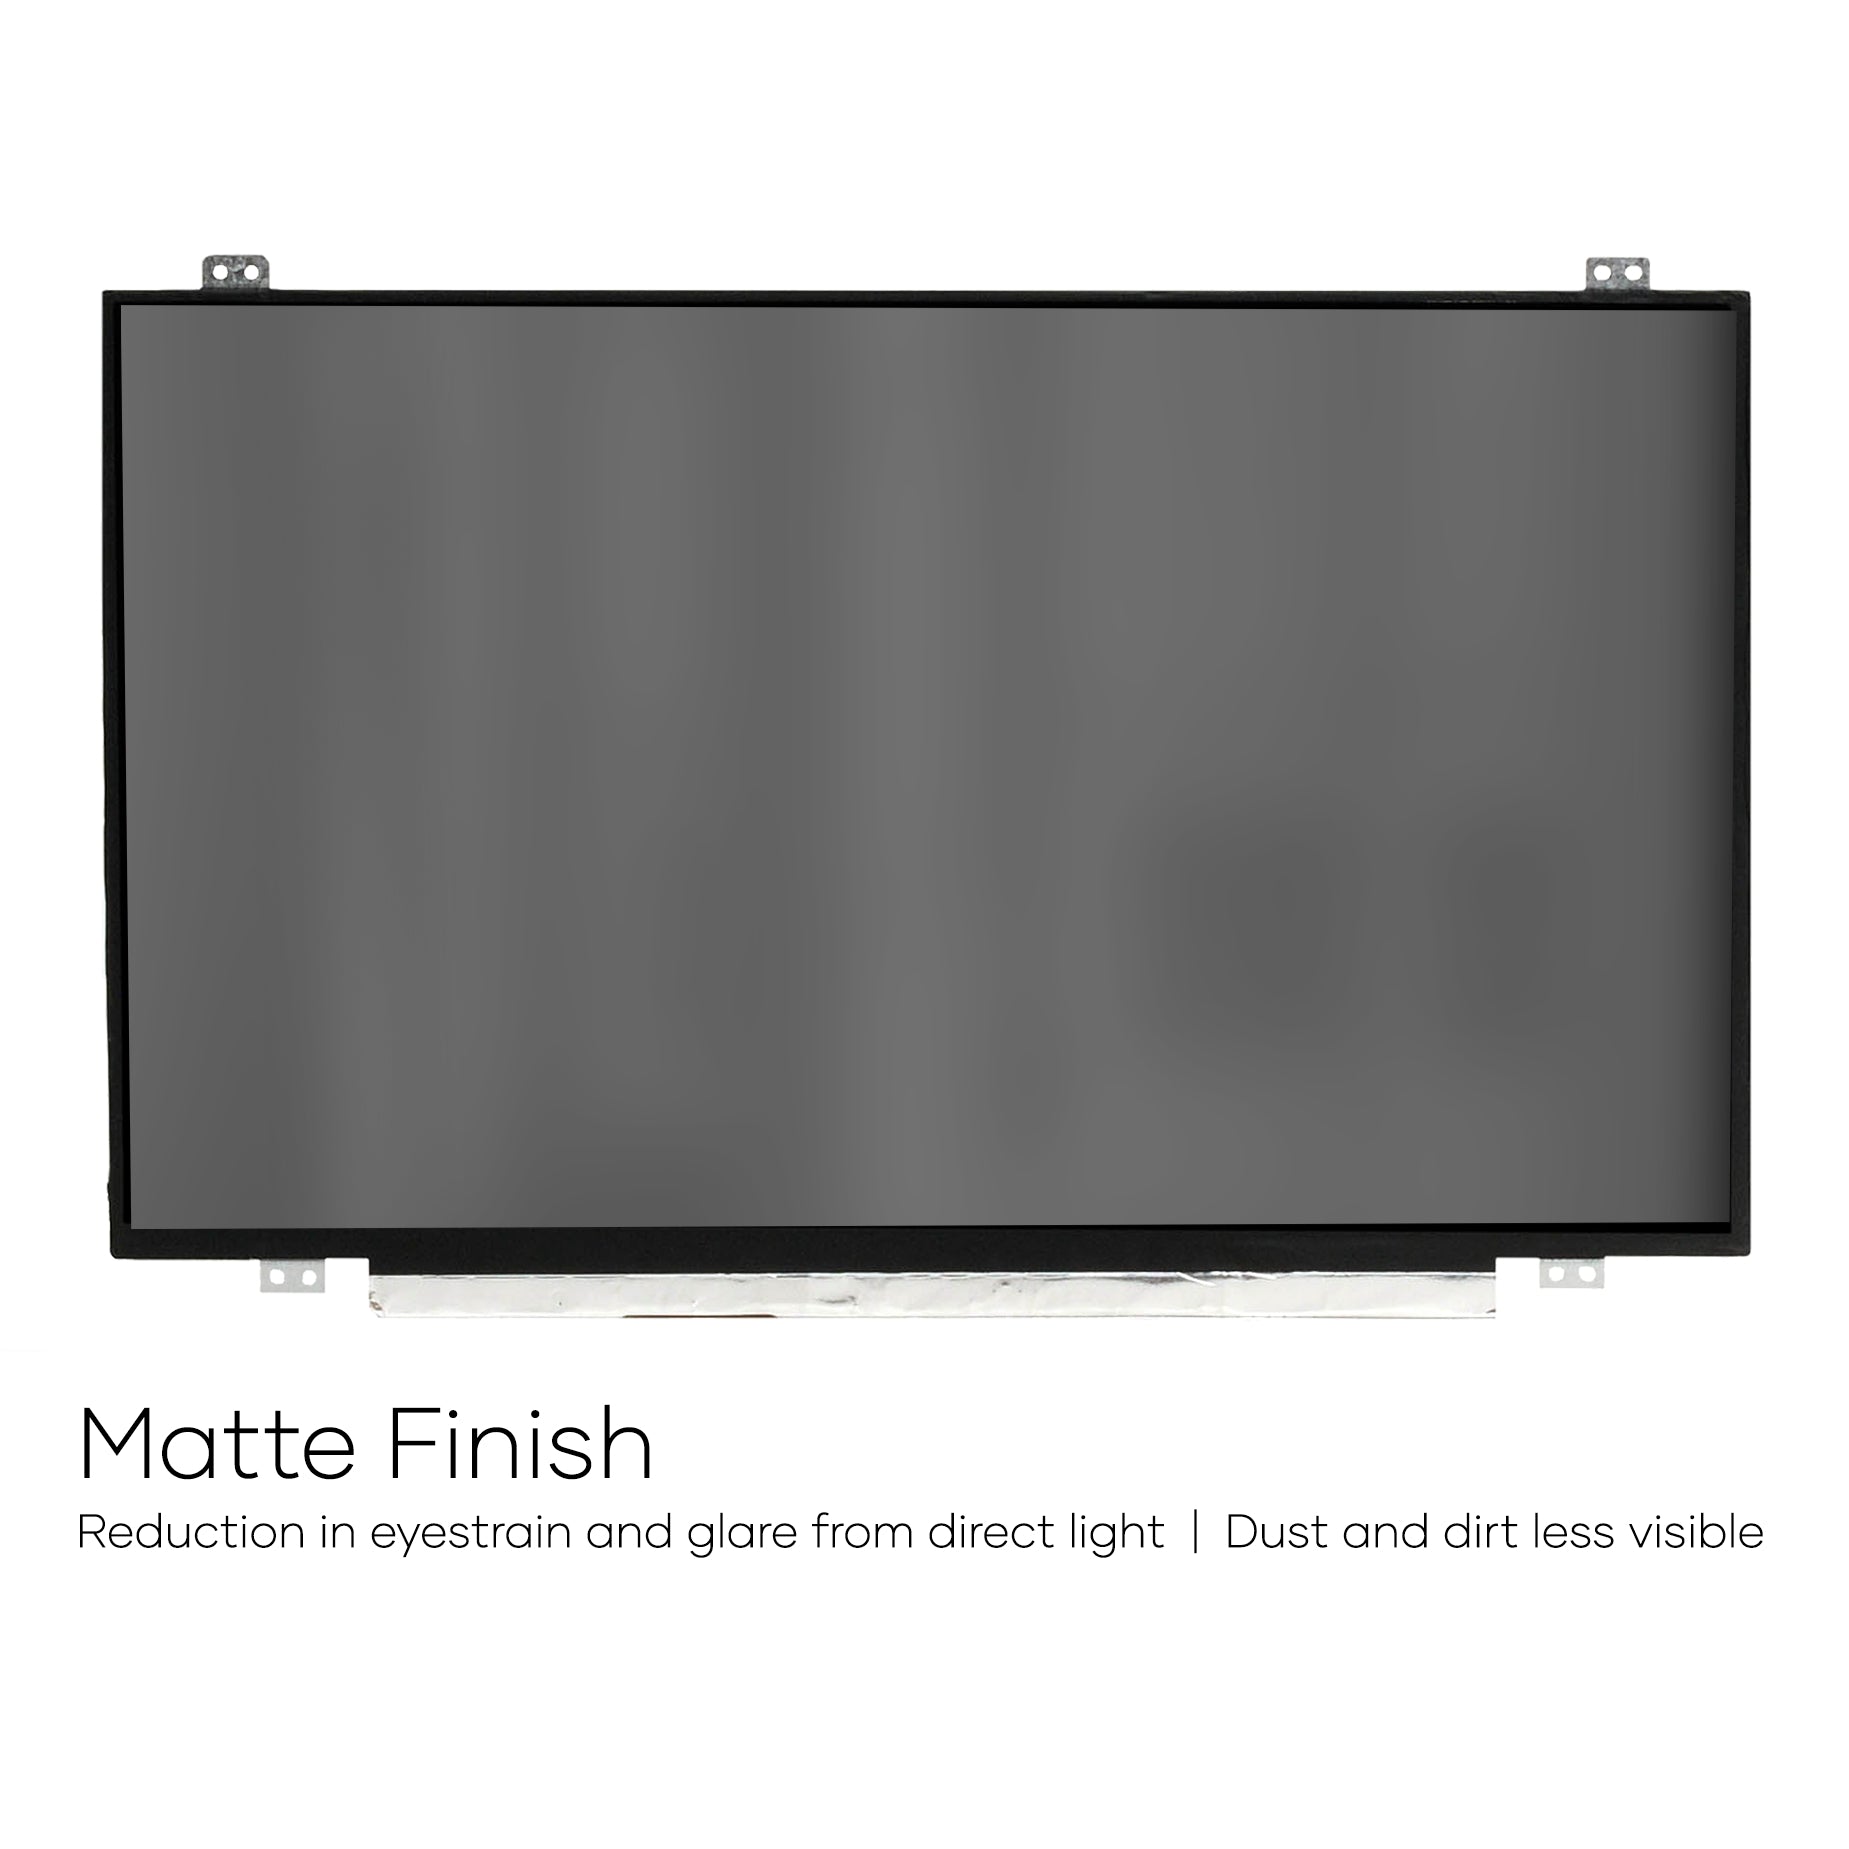 Screen Replacement for N156HGE-EA1 FHD 1920x1080 Matte LCD LED Display